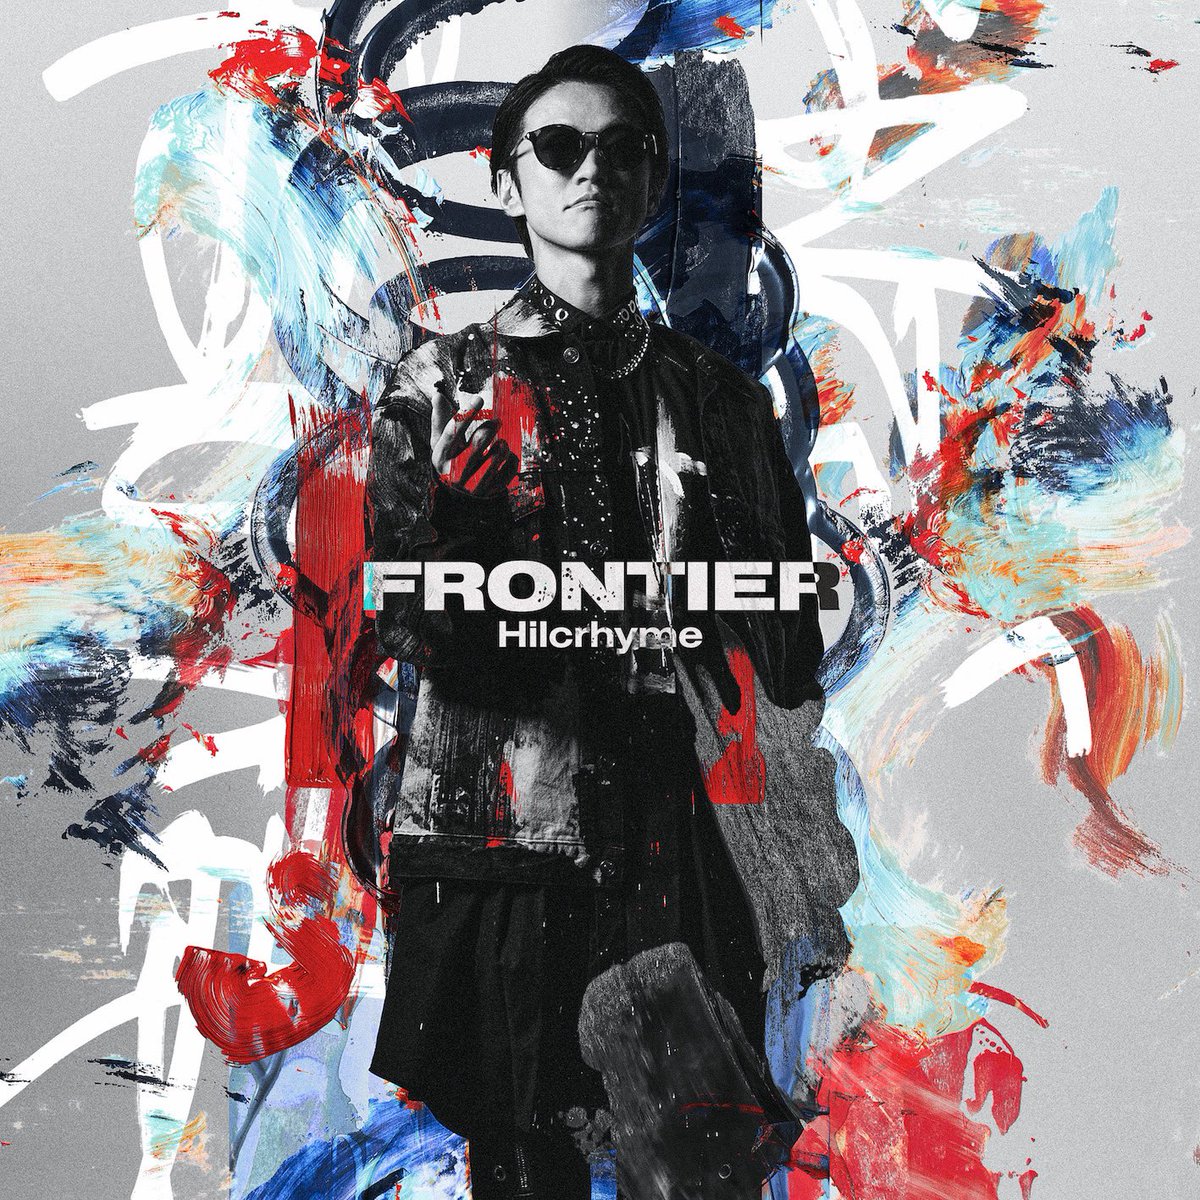 Cover art for『Hilcrhyme - FRONTIER』from the release『FRONTIER